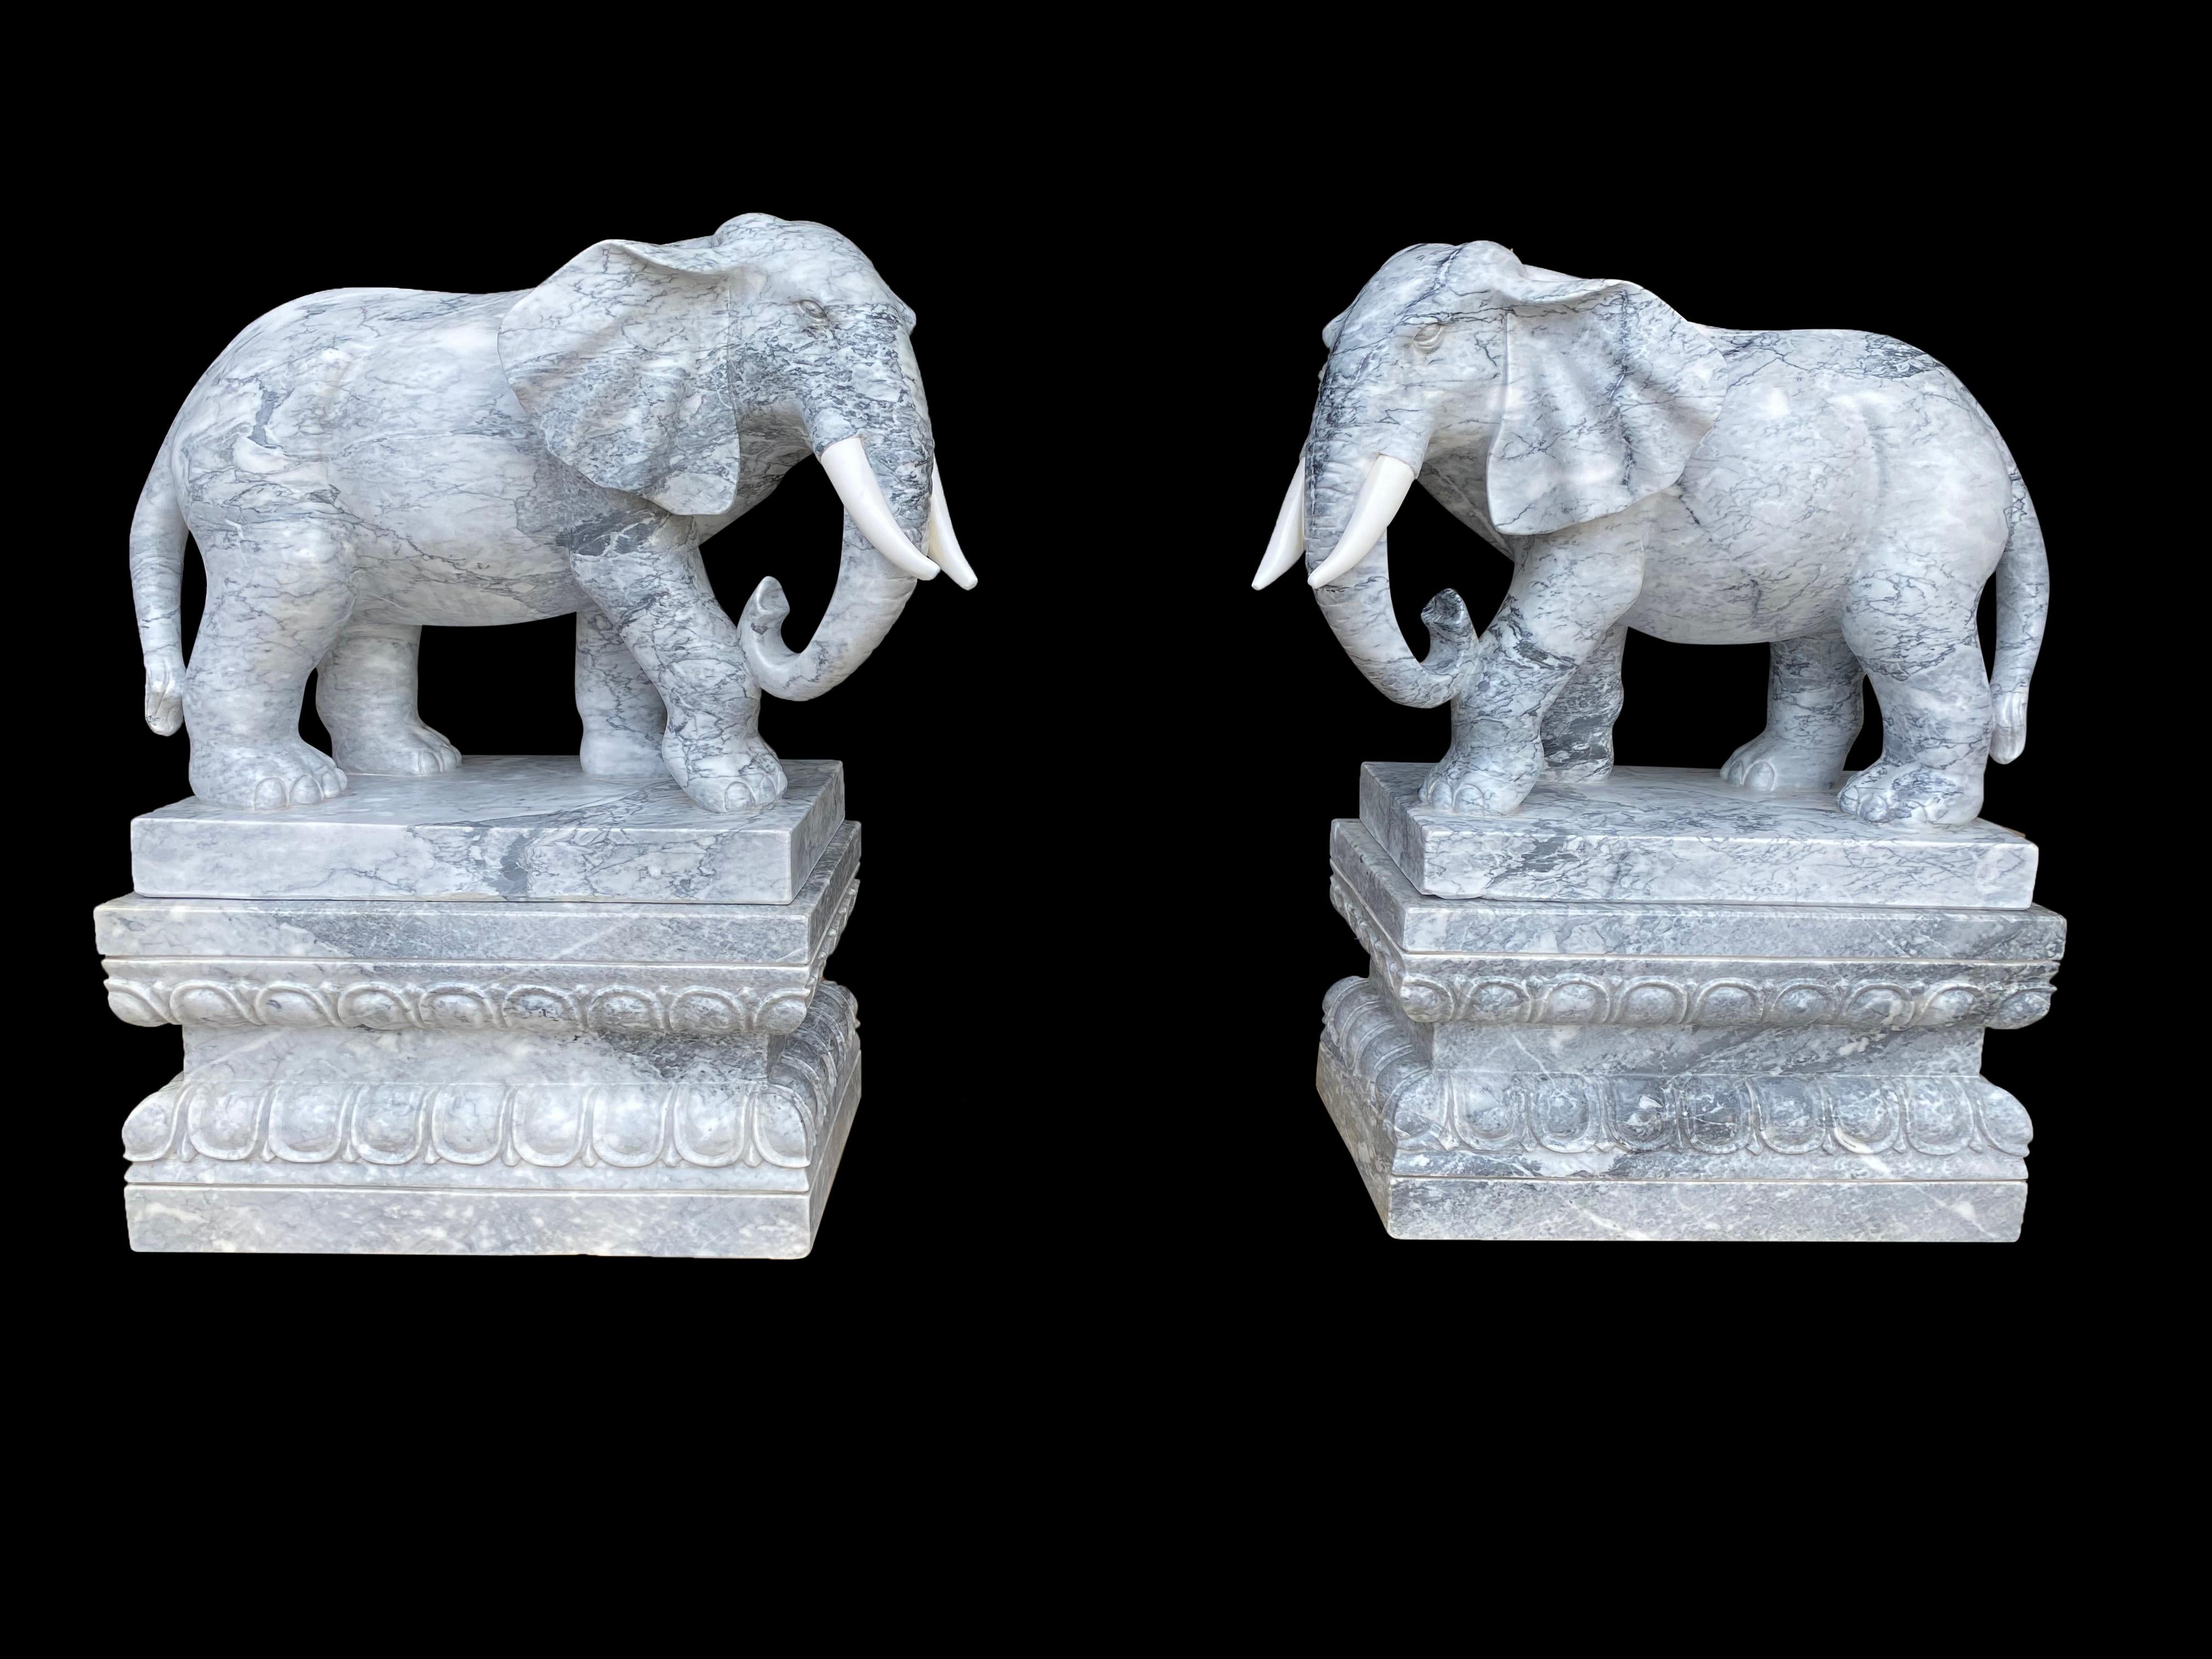 An absolutely stunning and unique pair of marble elephants on plinths, 20th century. The ocean blue veins provide striking colour in this pair, with astounding carved detail. Each elephant is solid marble, and stand on solid marble bases. Perfect